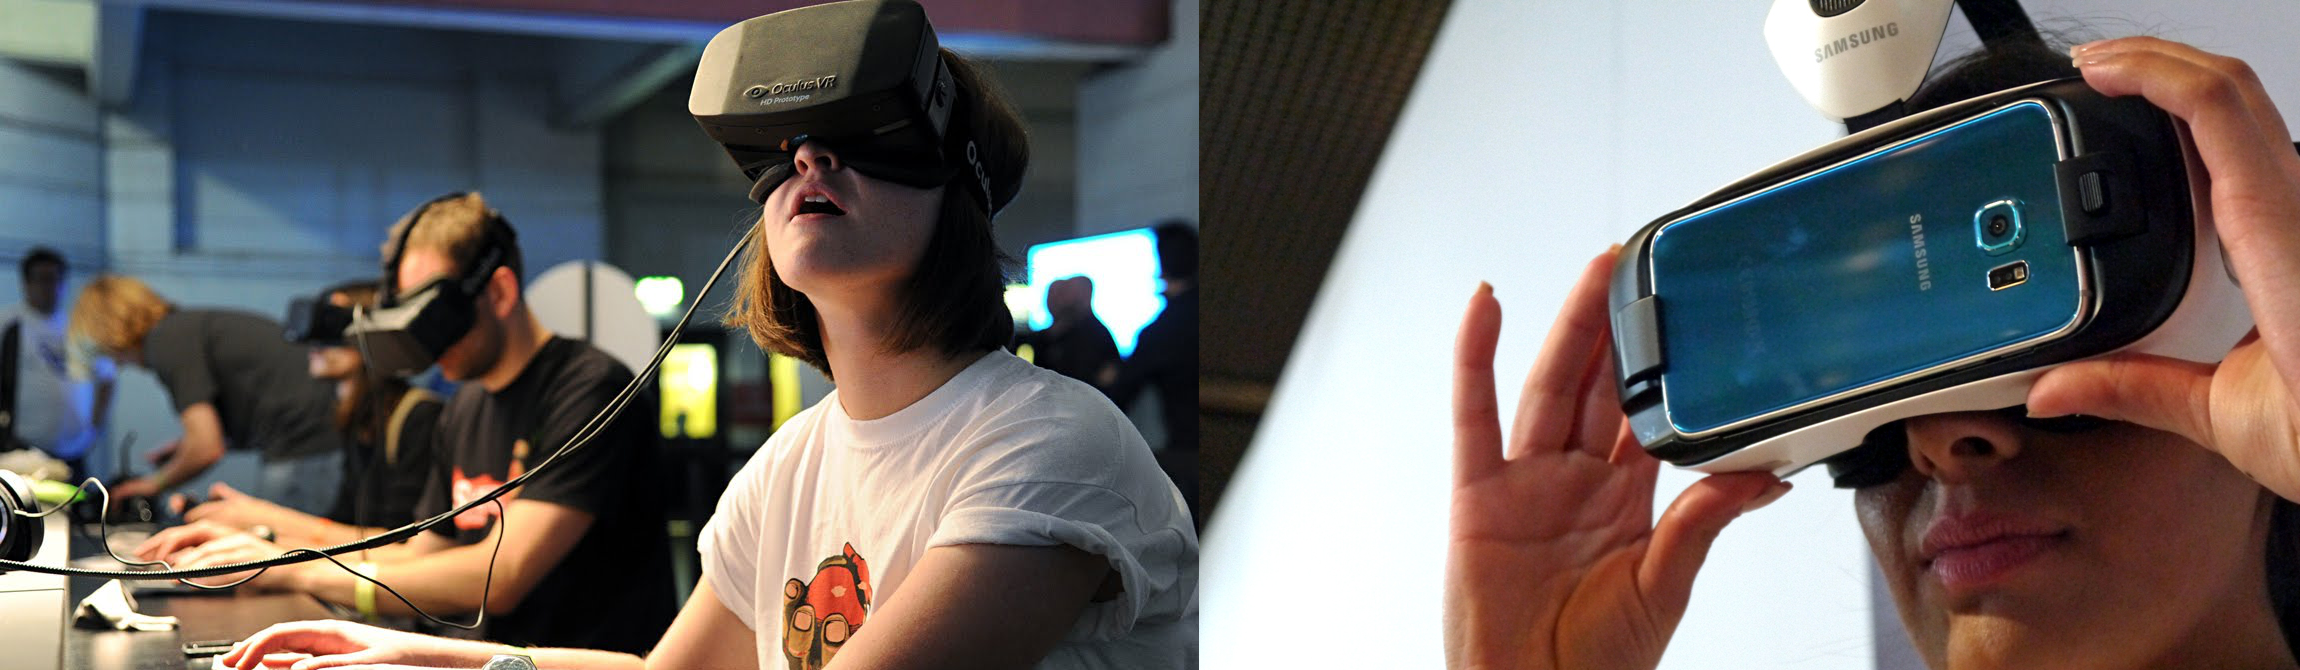 The Oculus Rift and the Samsung Gear VR headsets